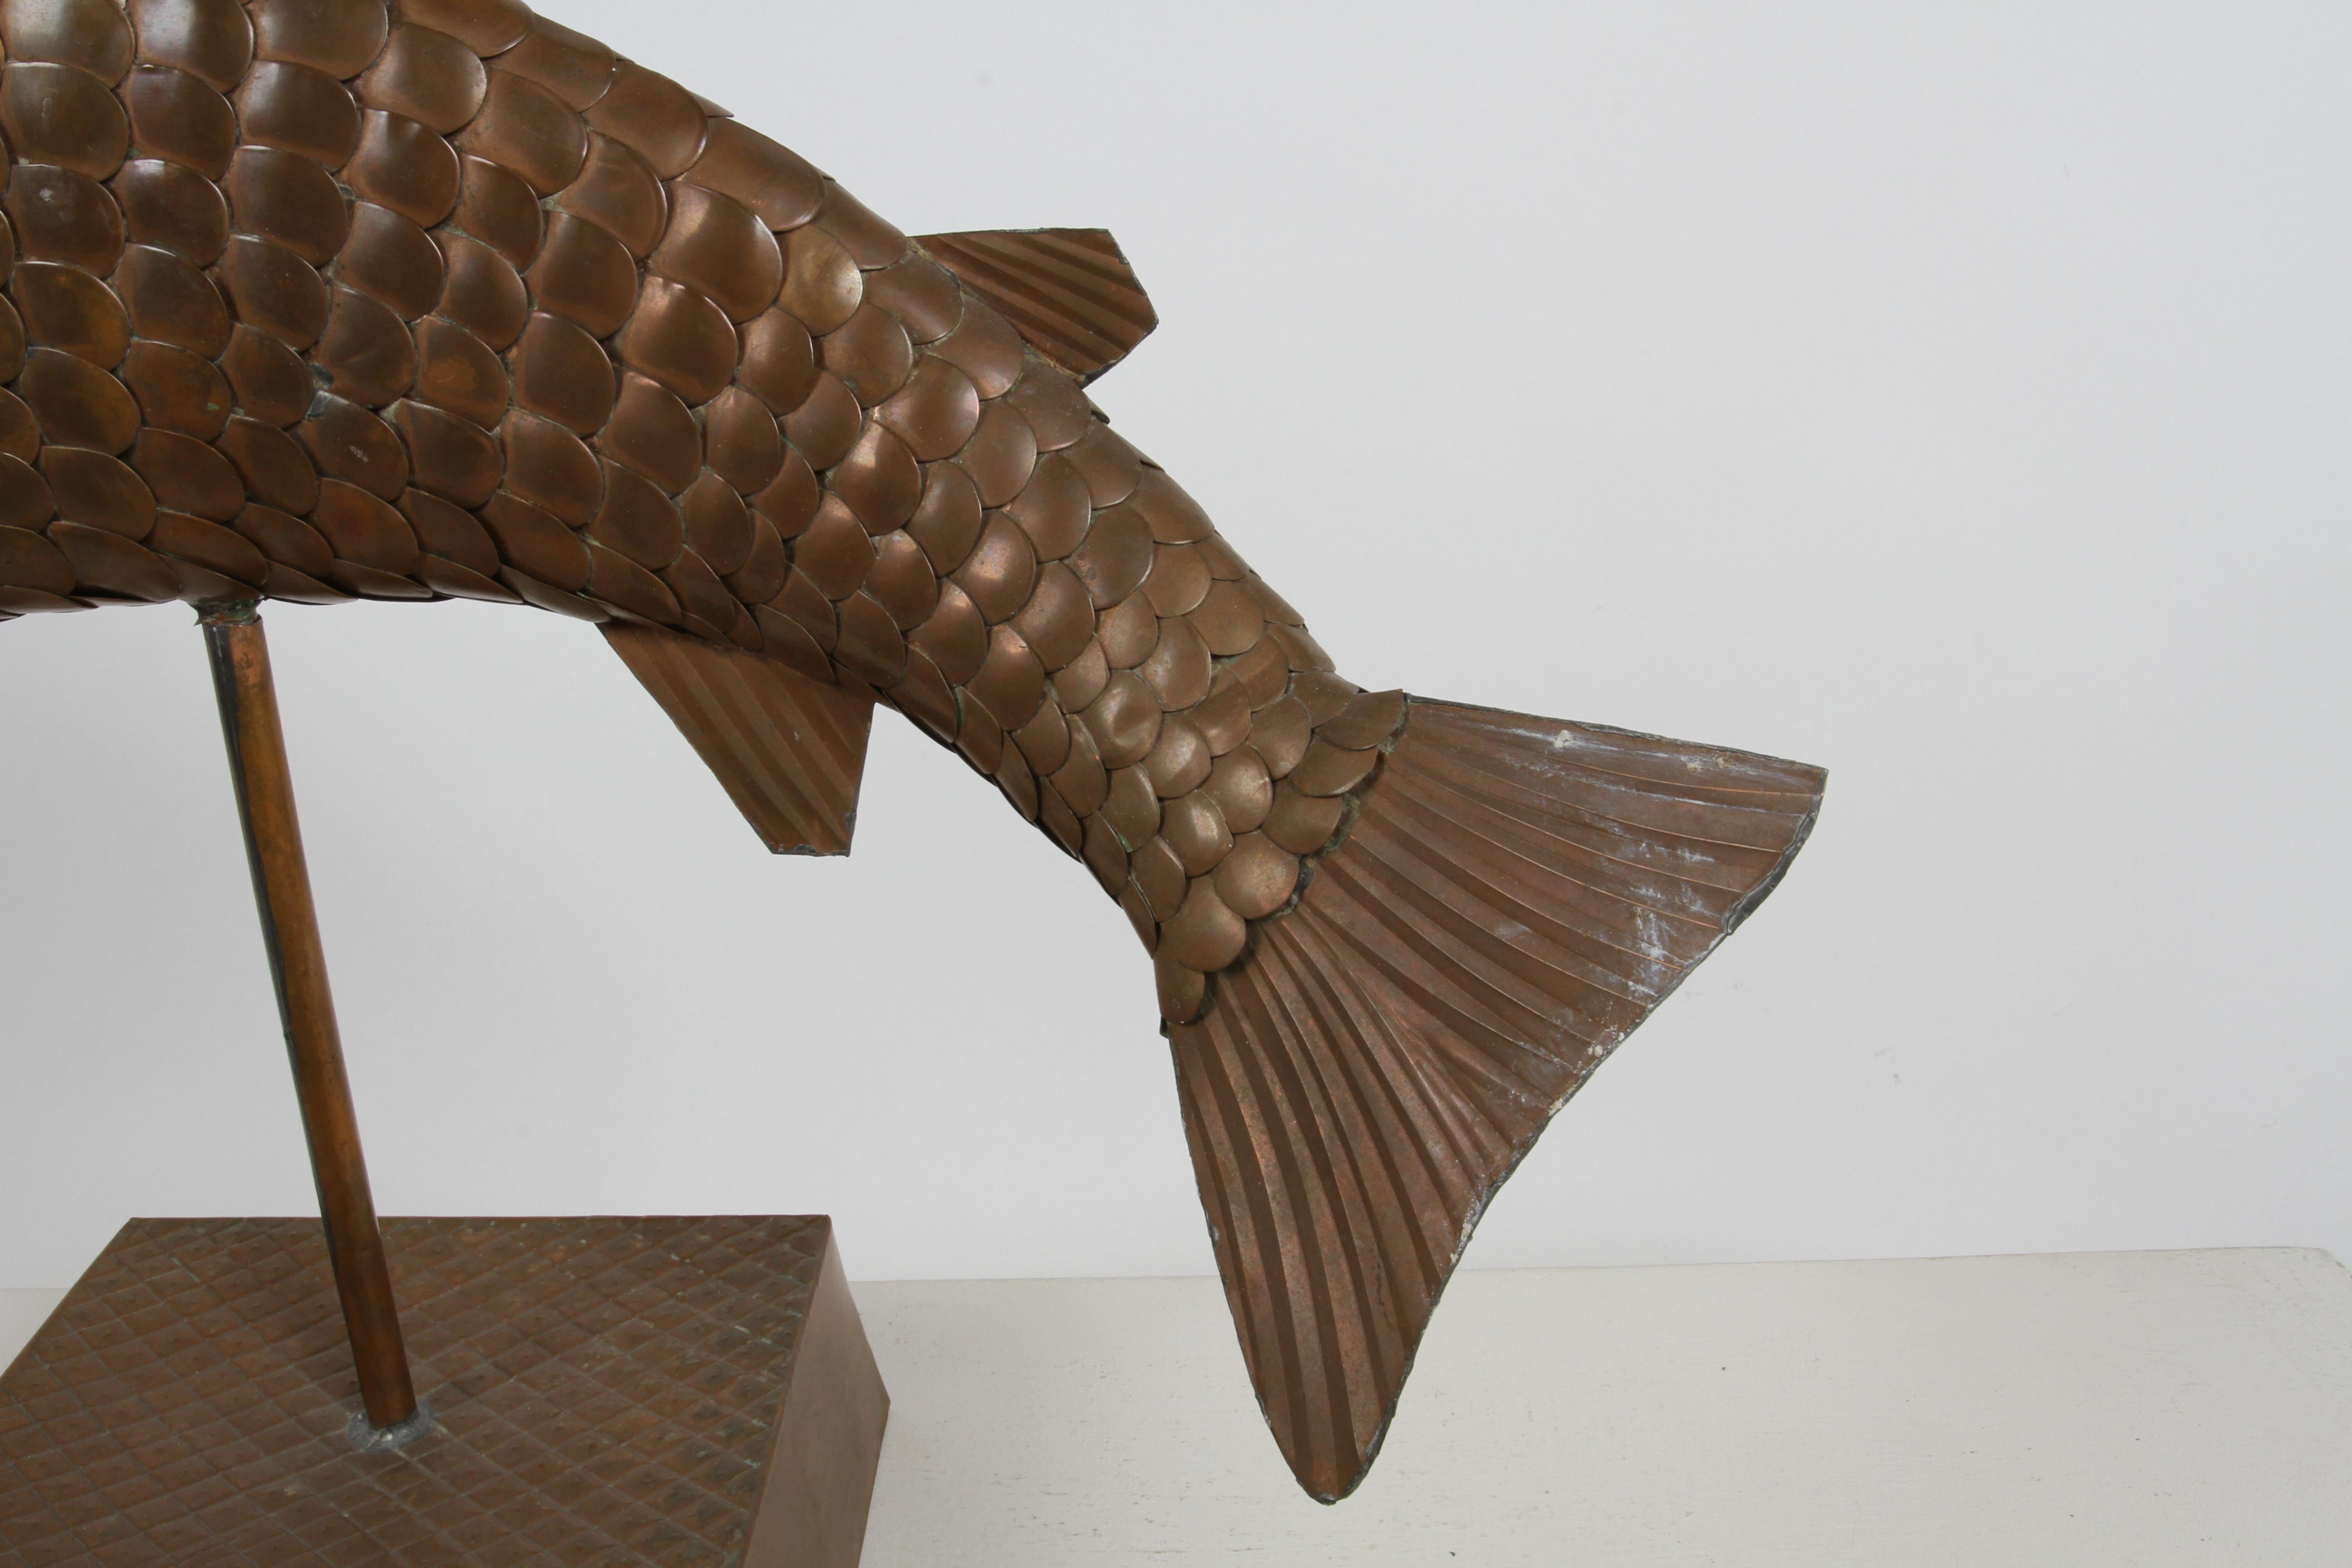 Sergio Bustamante Mexican Artist 1934-2014 Mounted Sculpture Copper Fish -Signed 4